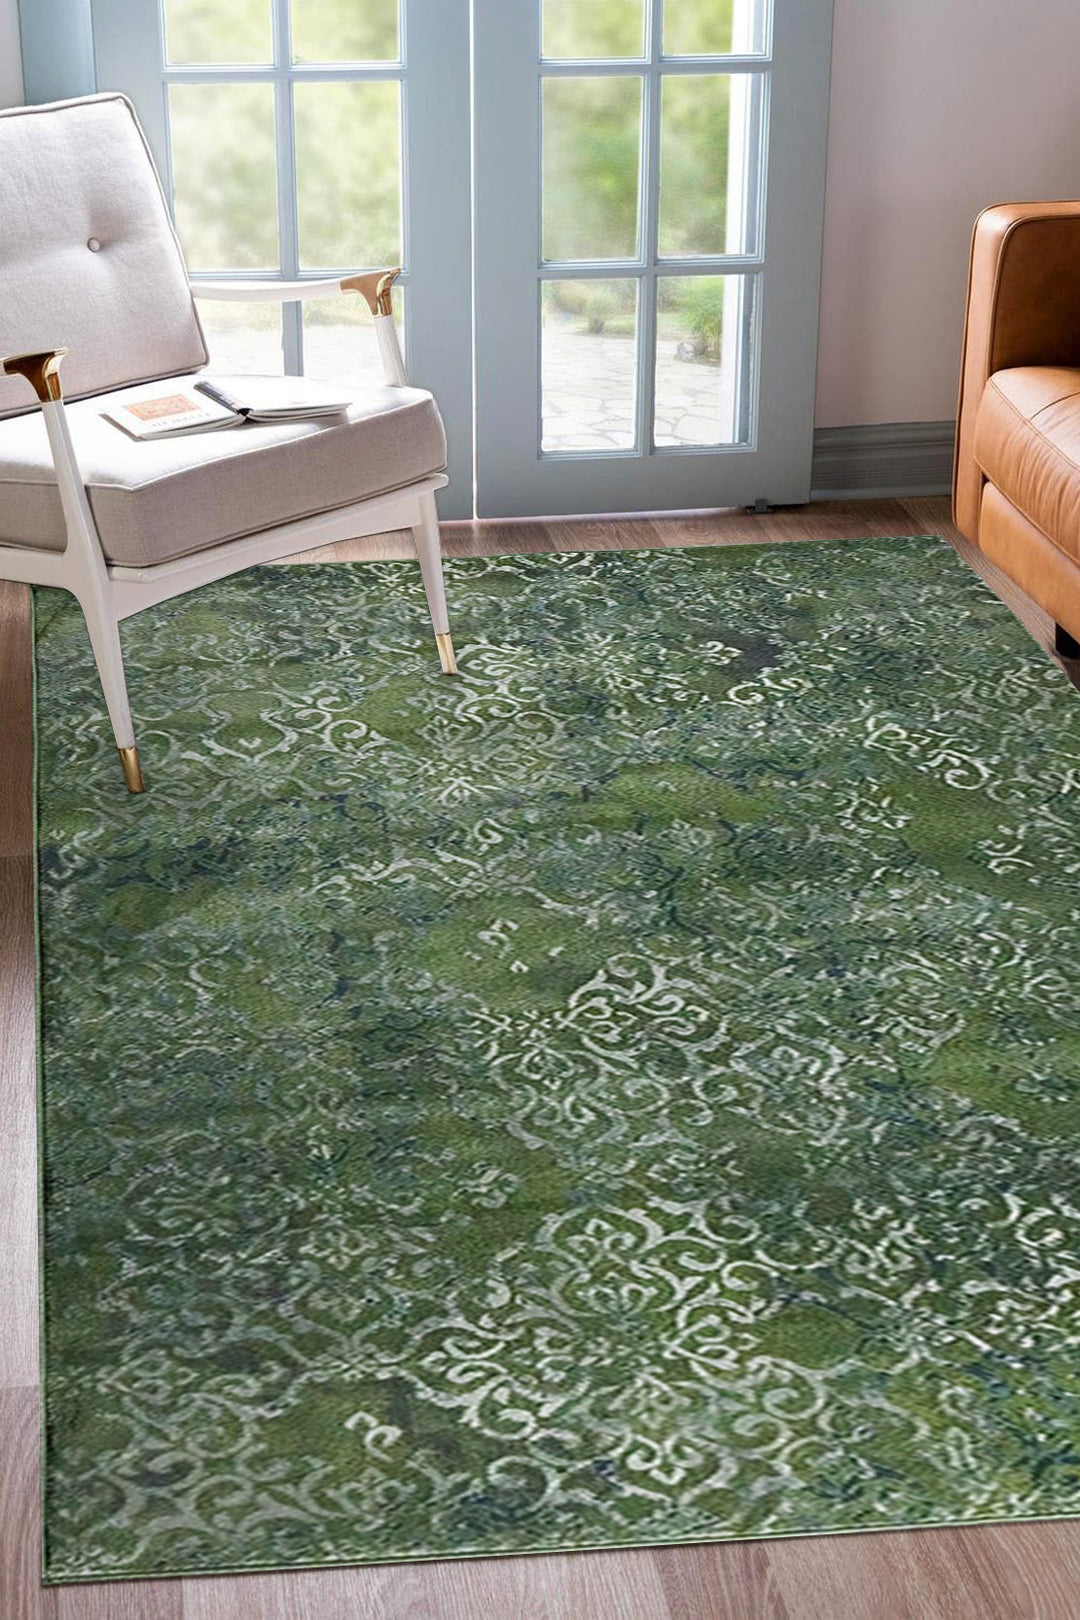 Turkish Modern Festival WD Rug - 6.6 x 9.5 FT - Green and Cream- Sleek and Minimalist for Chic Interiors